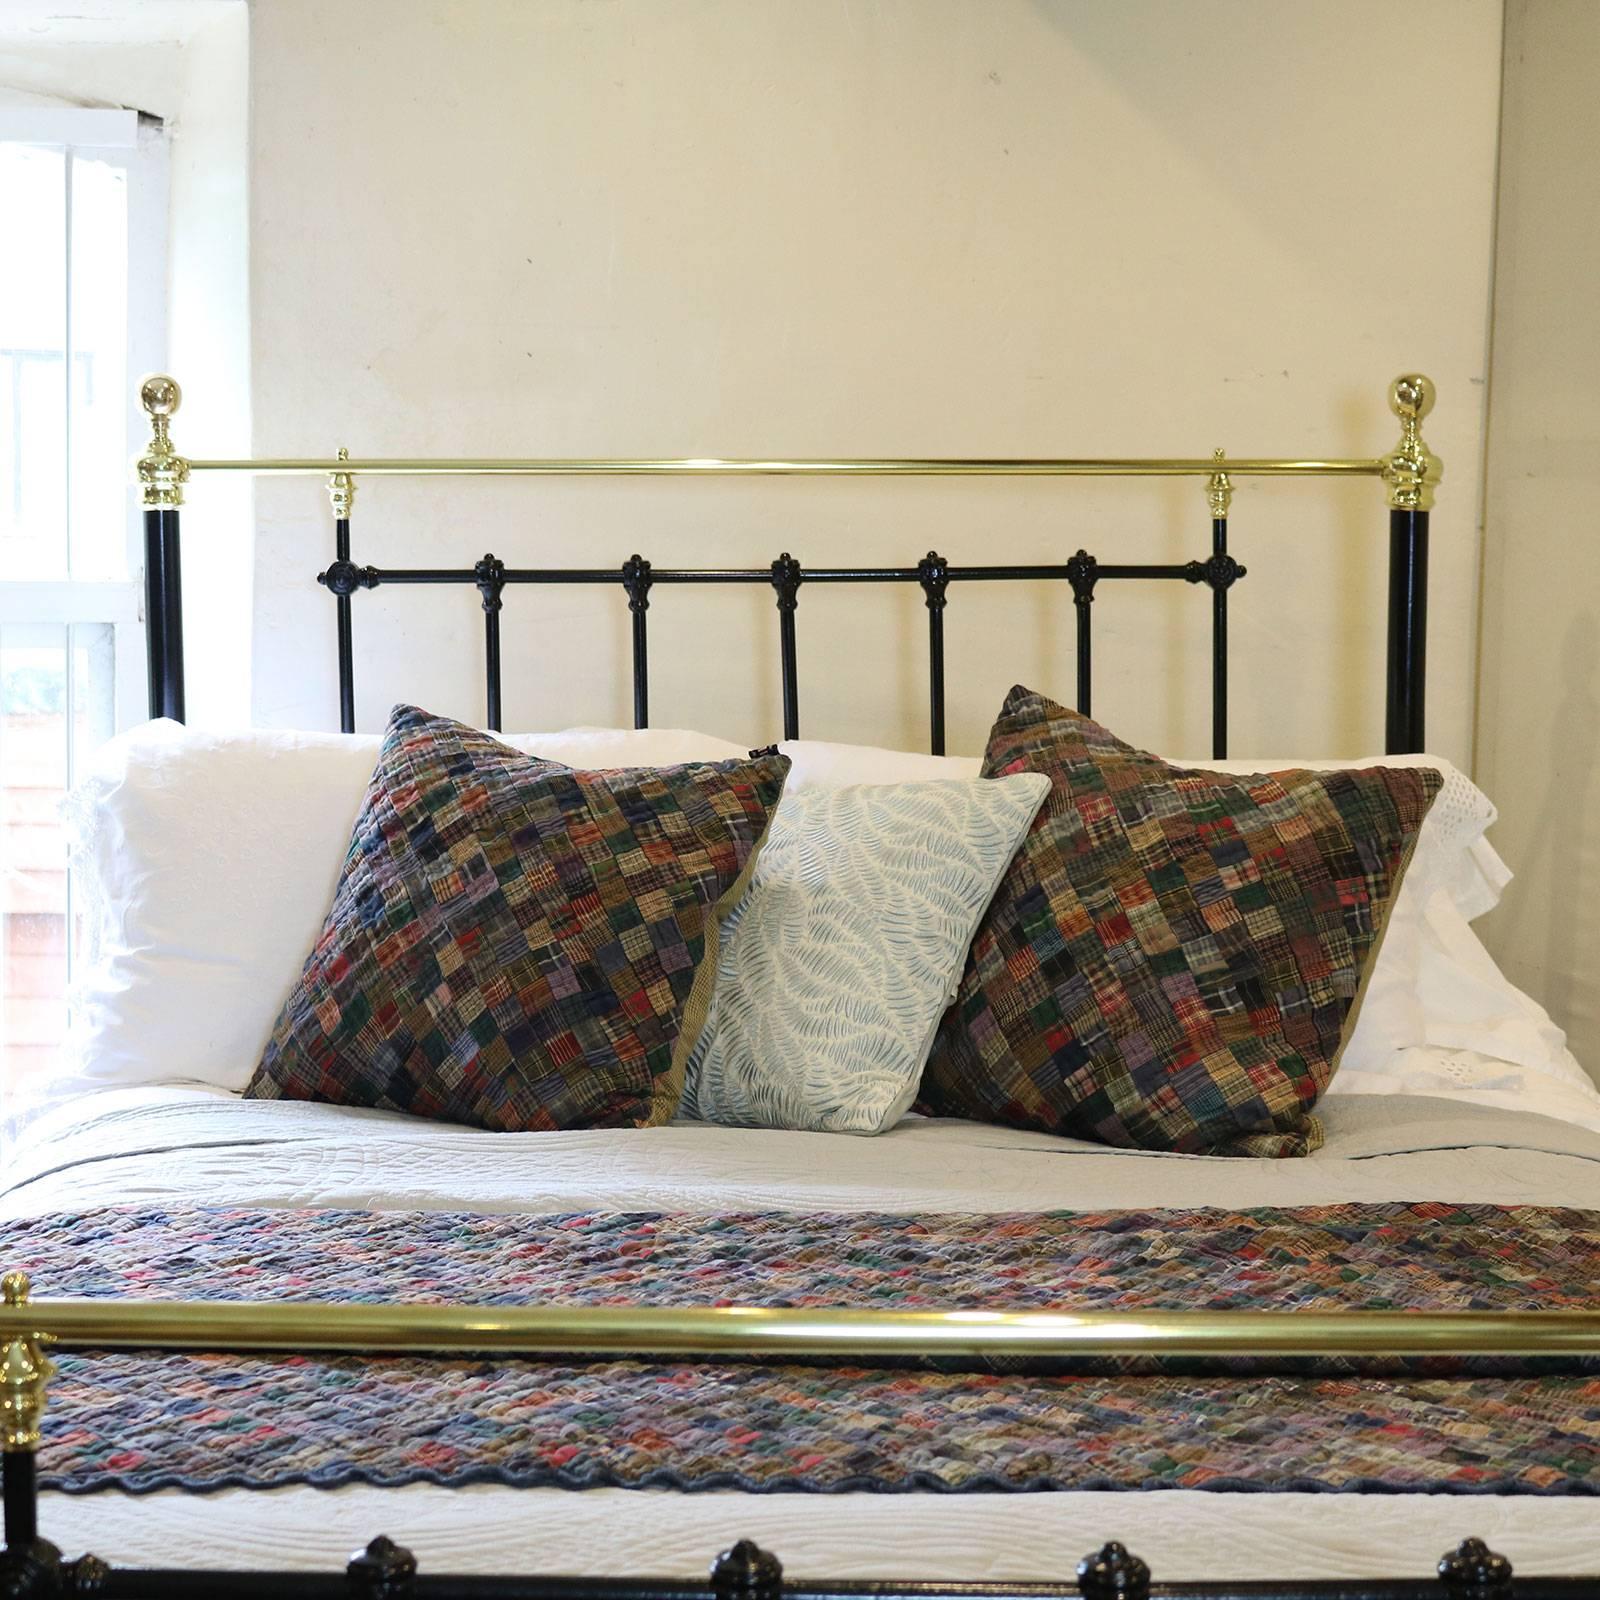 Classical Victorian cast iron and brass bedstead, finished in black with decorative cast iron mouldings, circa 1890. This frame has the added advantage of each bed end completely dismantling so it can go up any narrow or winding staircase.

This